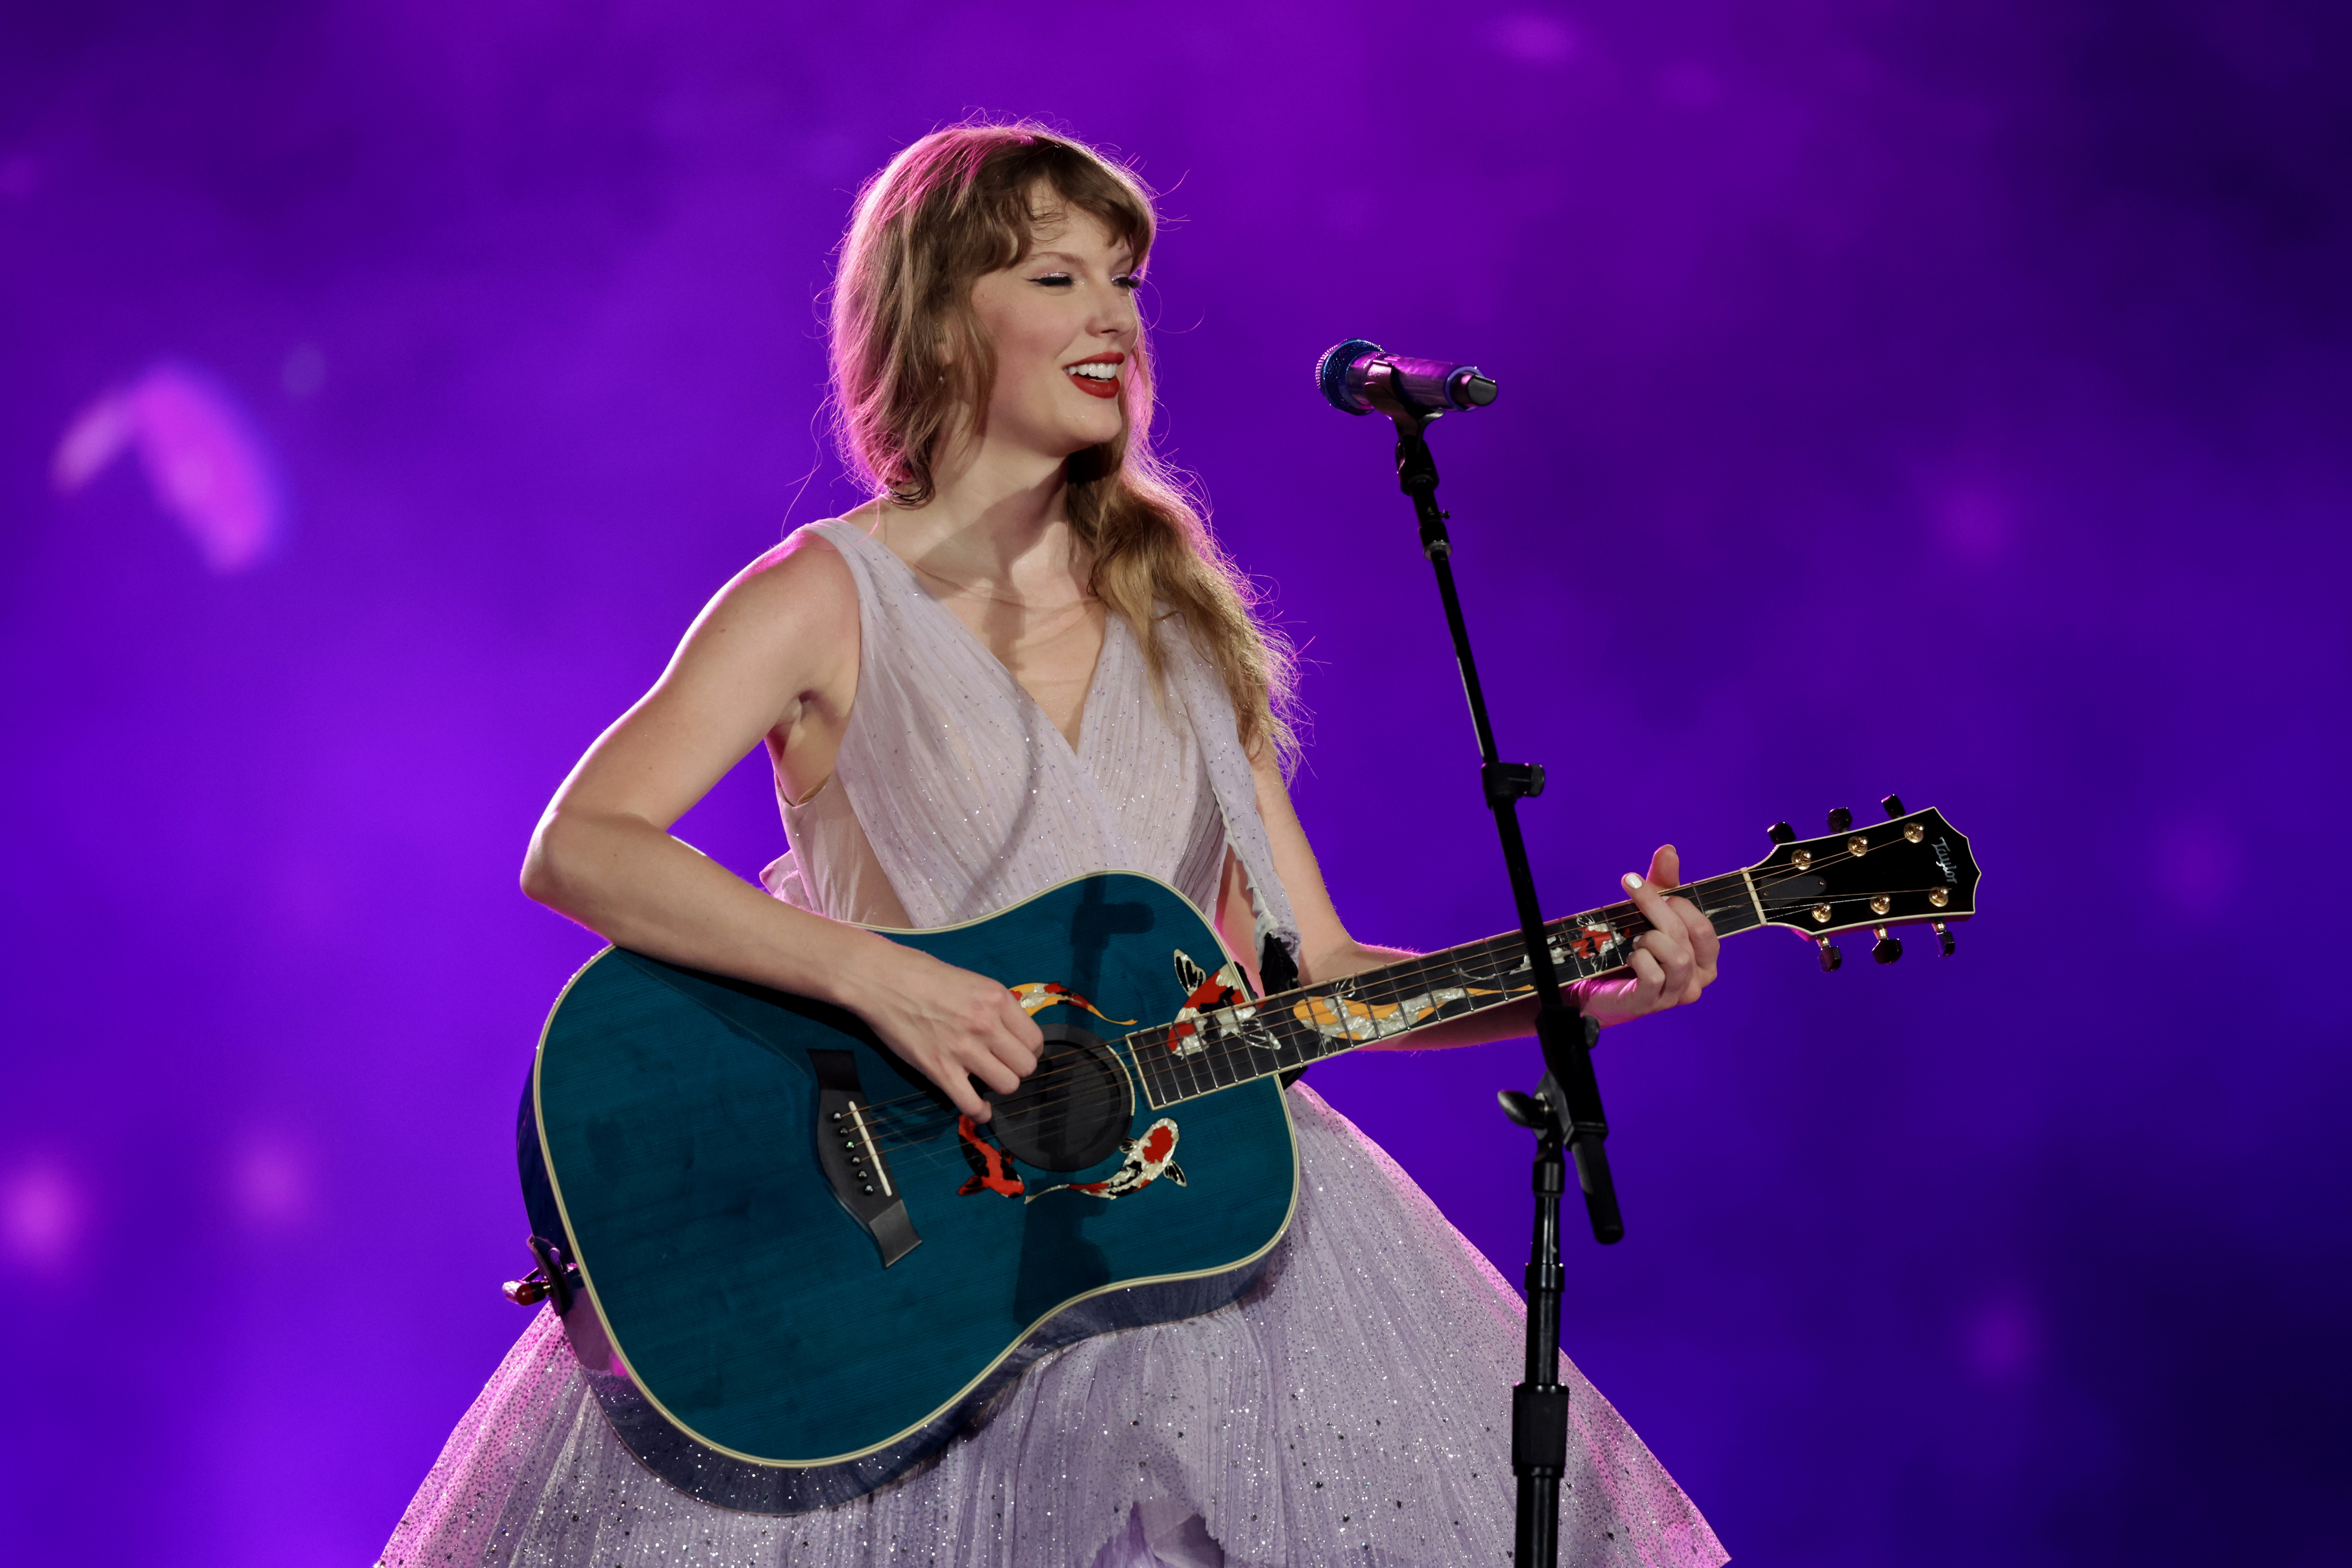 Taylor Swift performing with a guitar, wearing a white dress